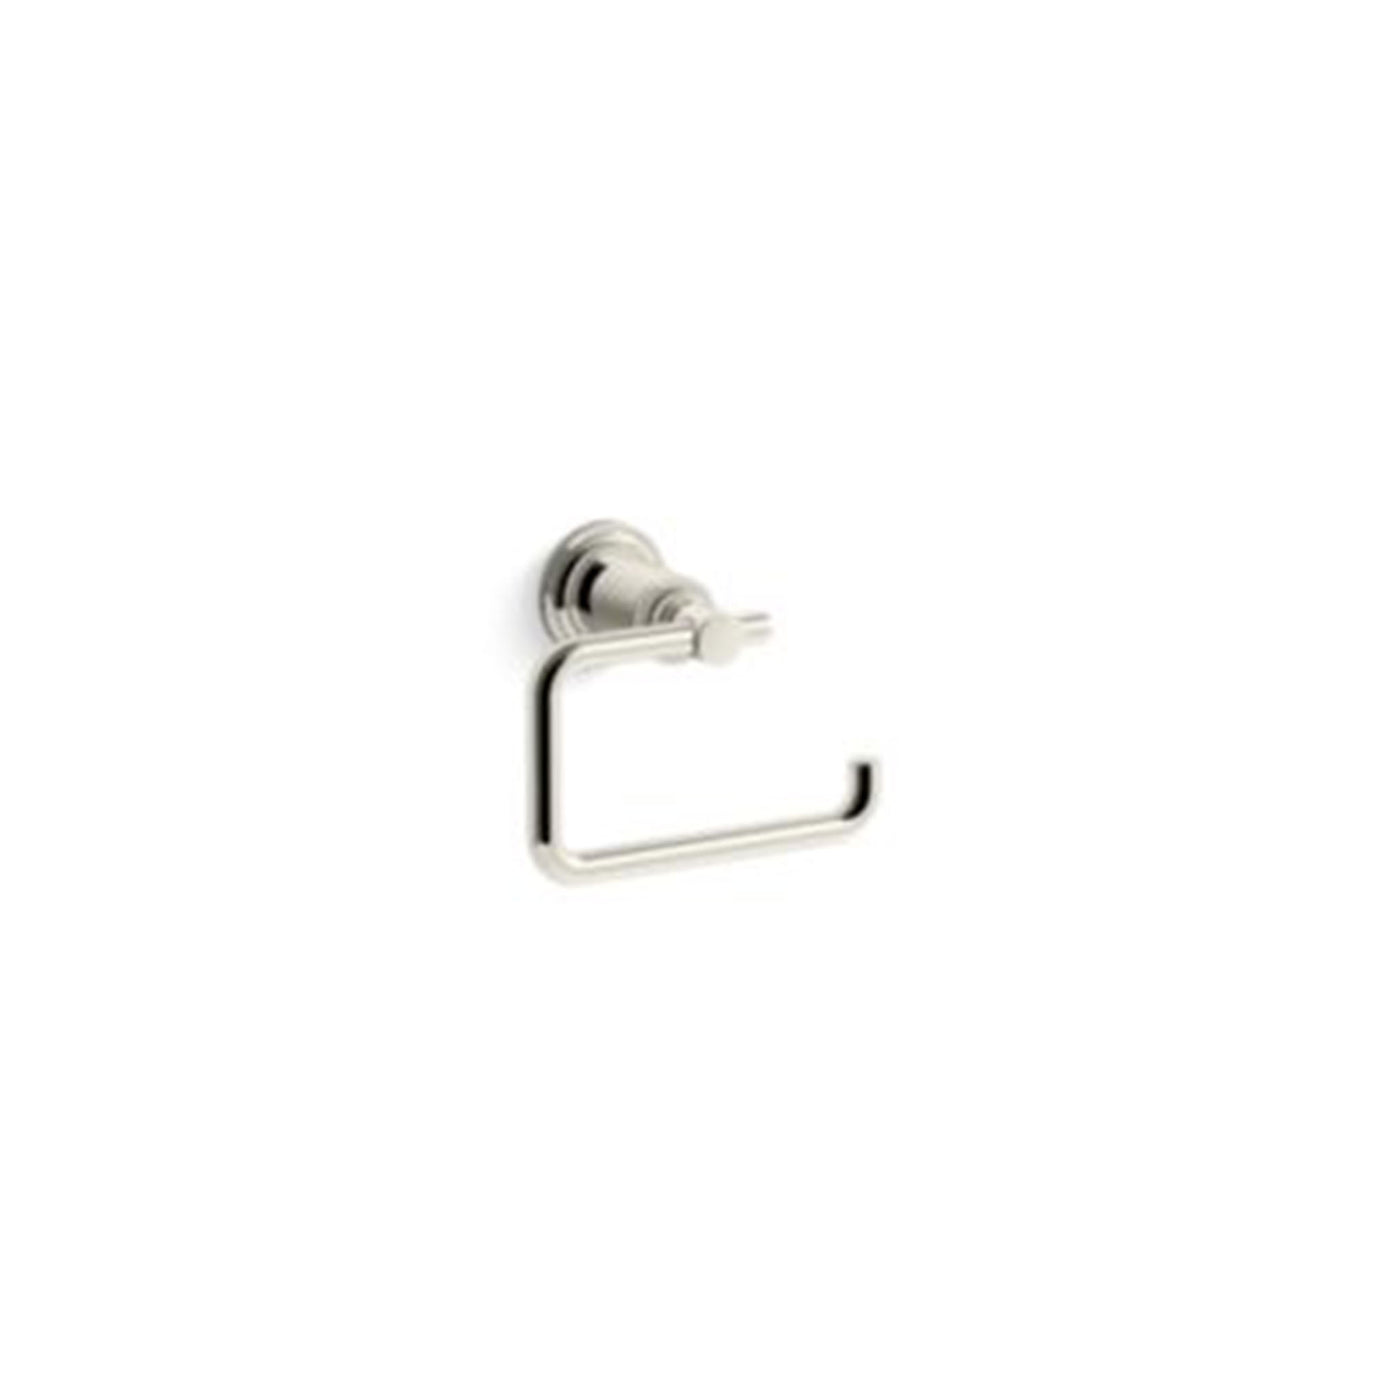 Central Park West™ by Robert A.M. Stern Architects Toilet Paper Holder